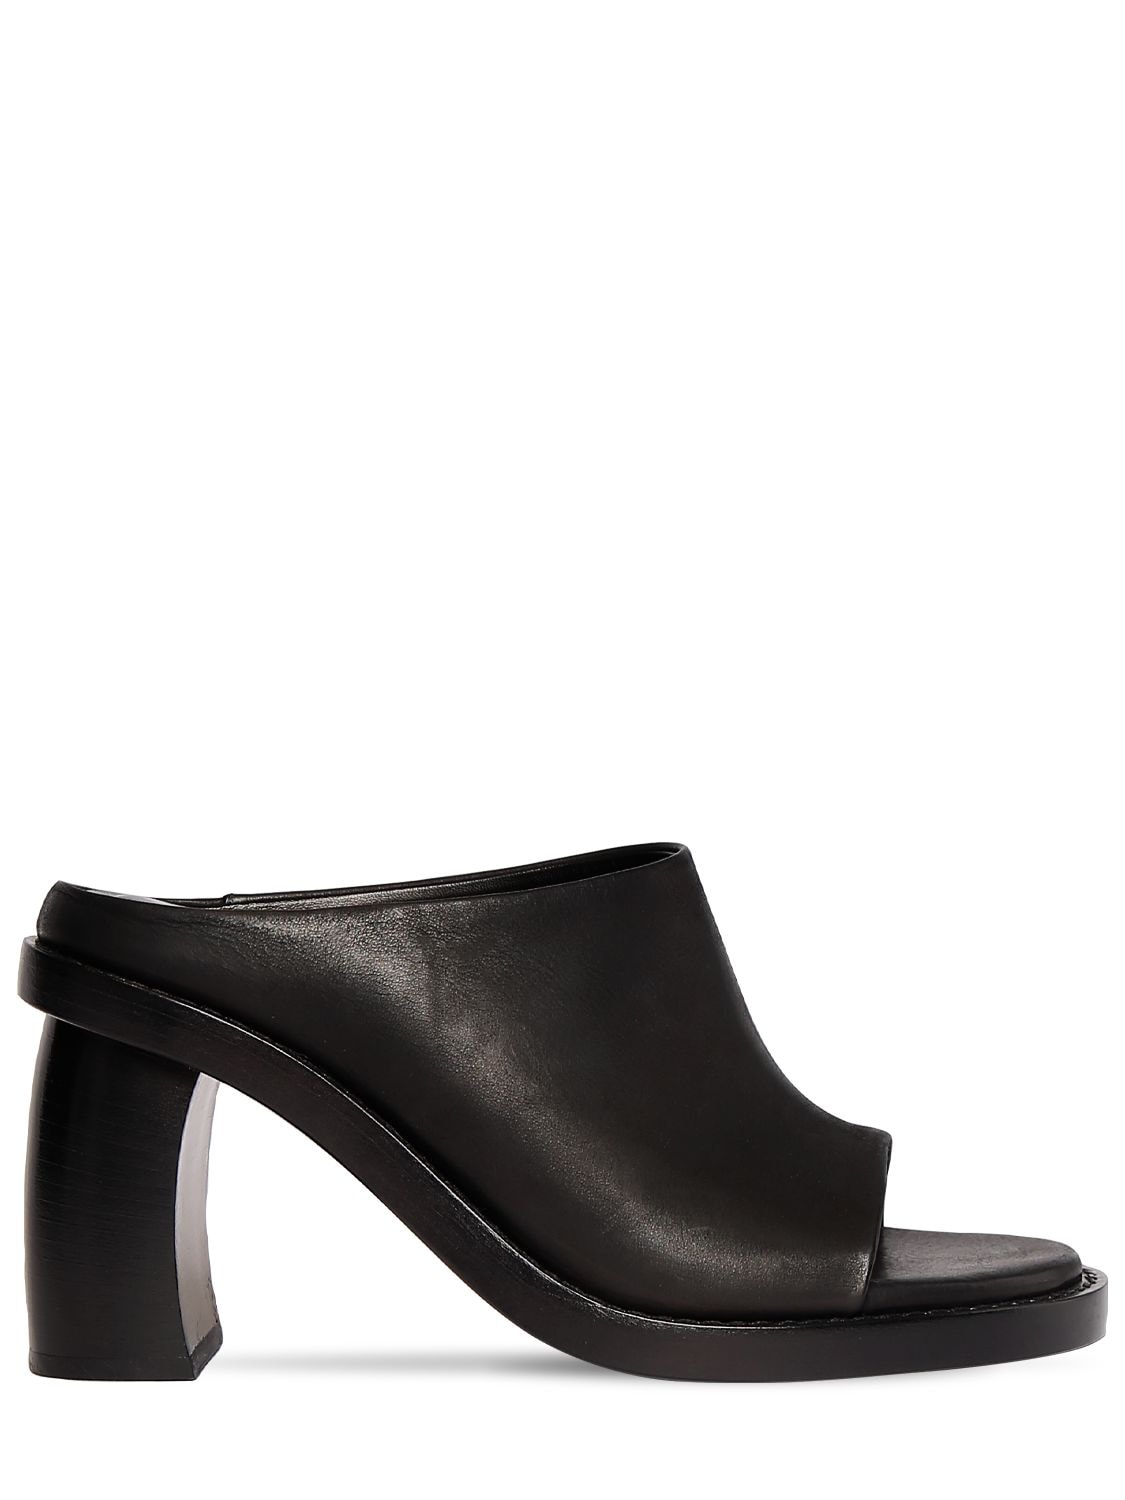 ANN DEMEULEMEESTER 90MM CLARA DUSTY LEATHER MULES